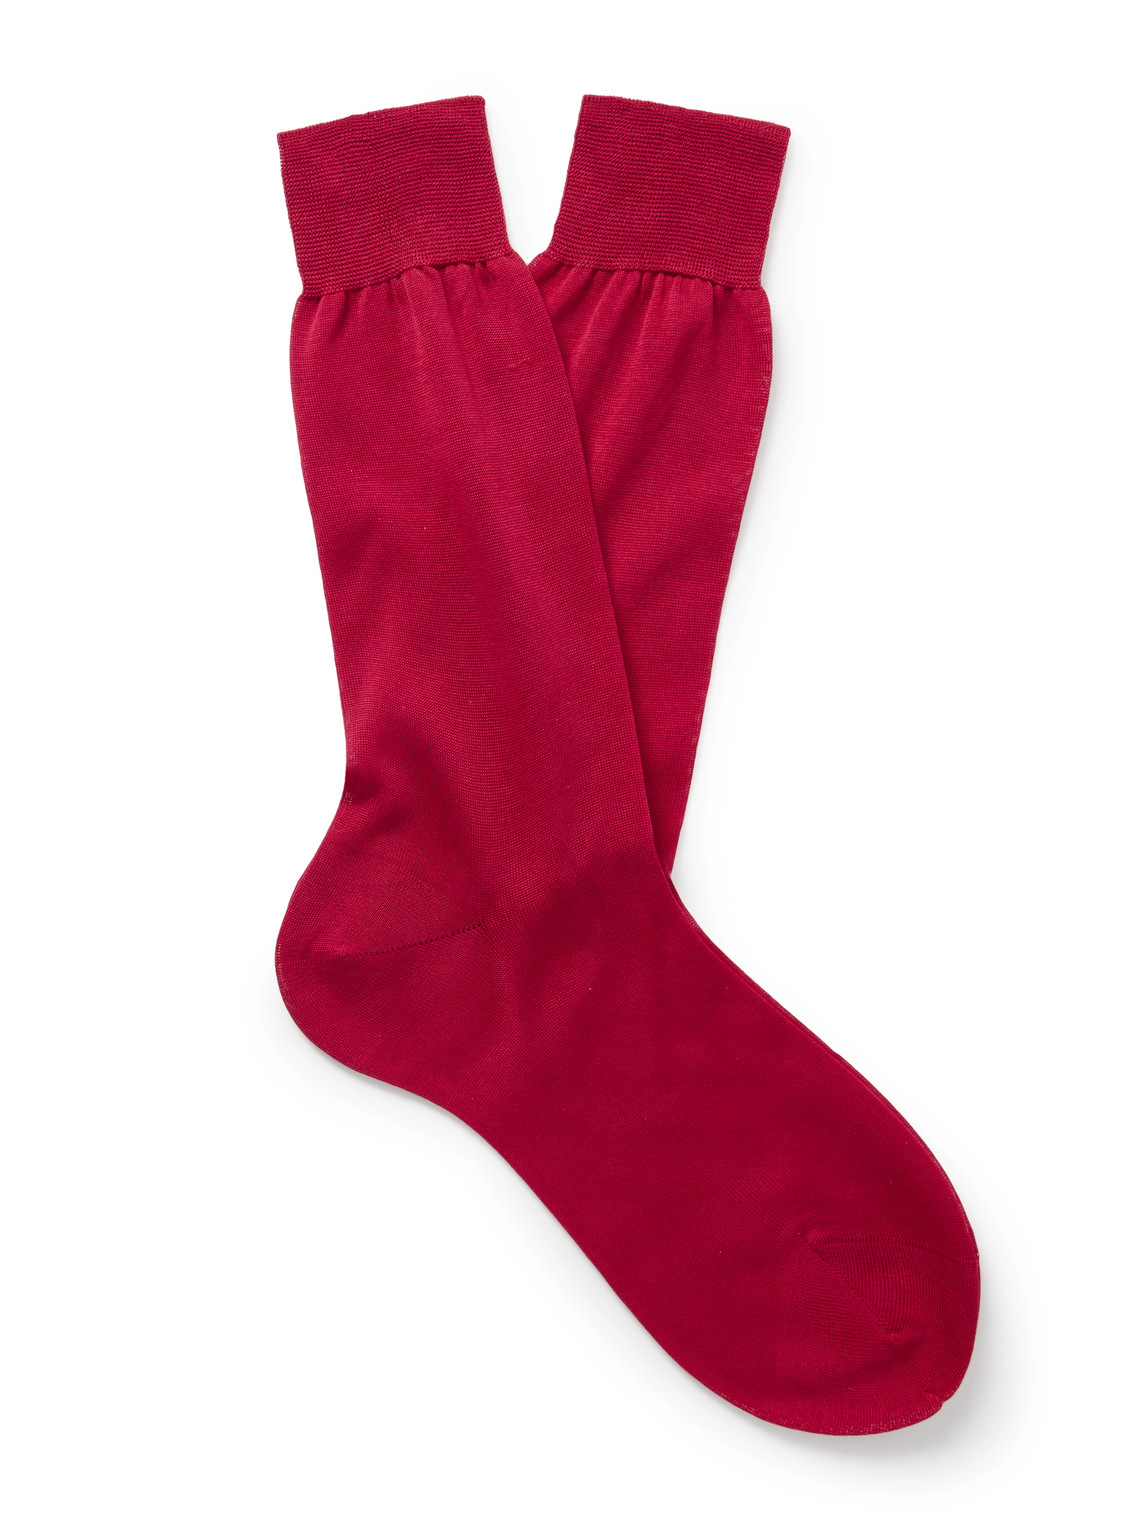 Anderson & Sheppard Cotton Socks In Red